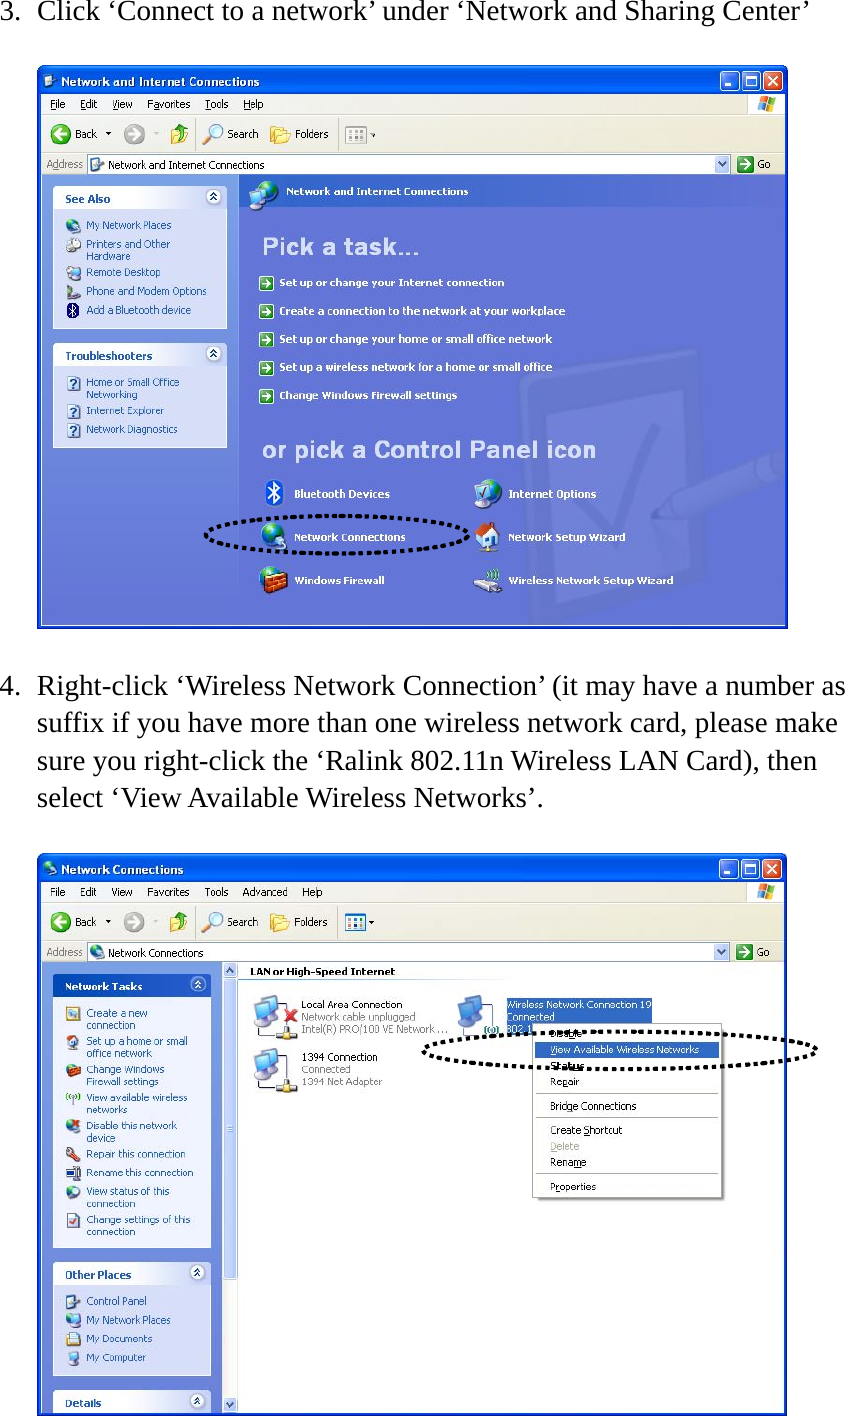 3. Click ‘Connect to a network’ under ‘Network and Sharing Center’    4. Right-click ‘Wireless Network Connection’ (it may have a number as suffix if you have more than one wireless network card, please make sure you right-click the ‘Ralink 802.11n Wireless LAN Card), then select ‘View Available Wireless Networks’.   